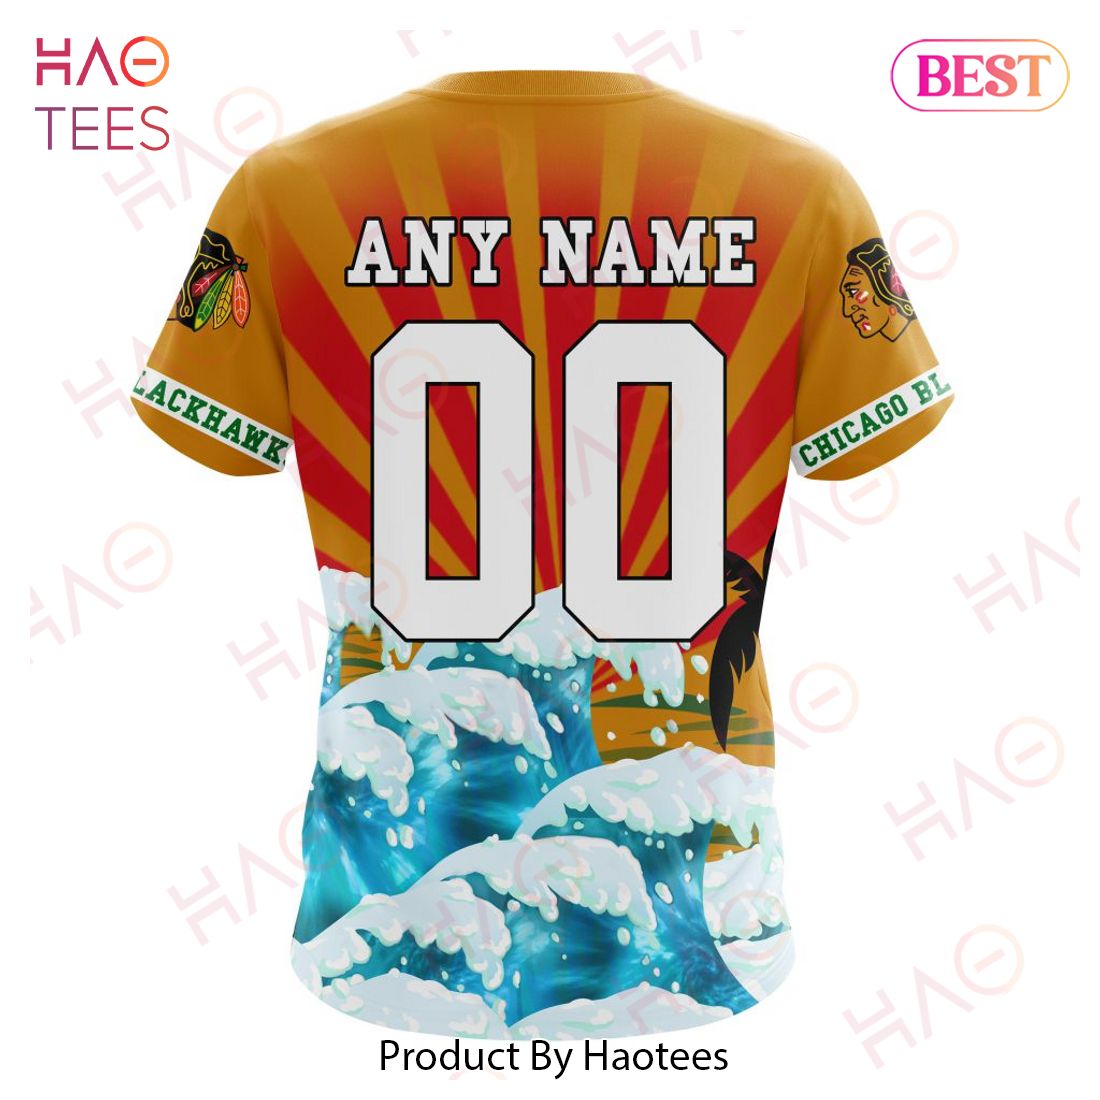 Grateful Dead Chicago Blackhawks 3D Hockey Jersey Personalized Name Number